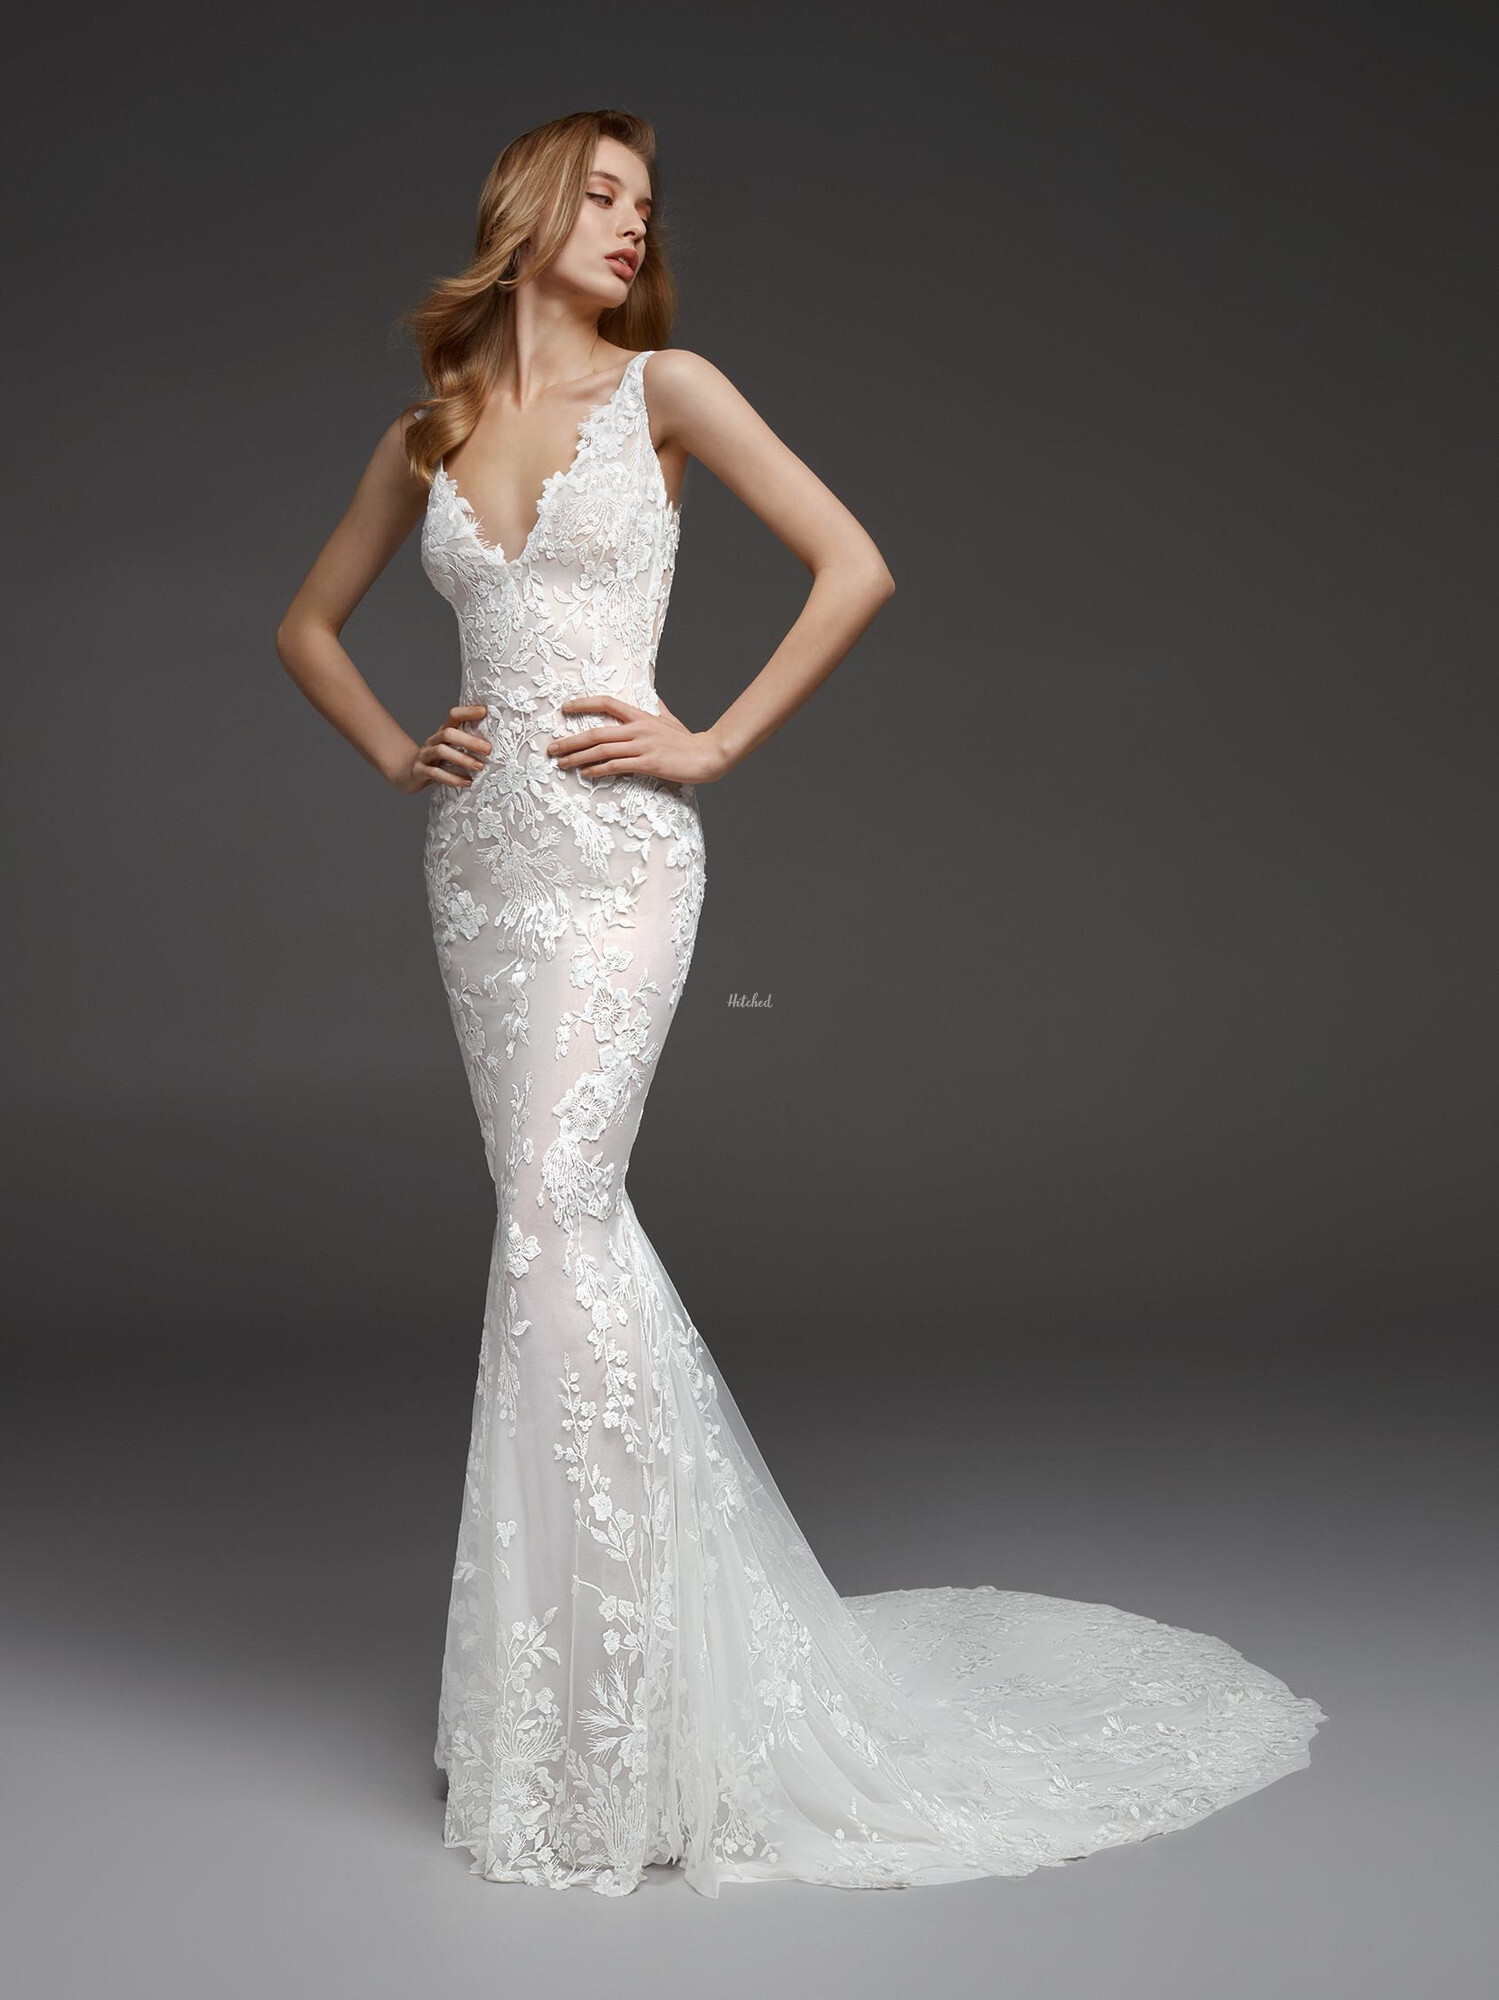 CALAS Wedding Dress from Pronovias - hitched.co.uk